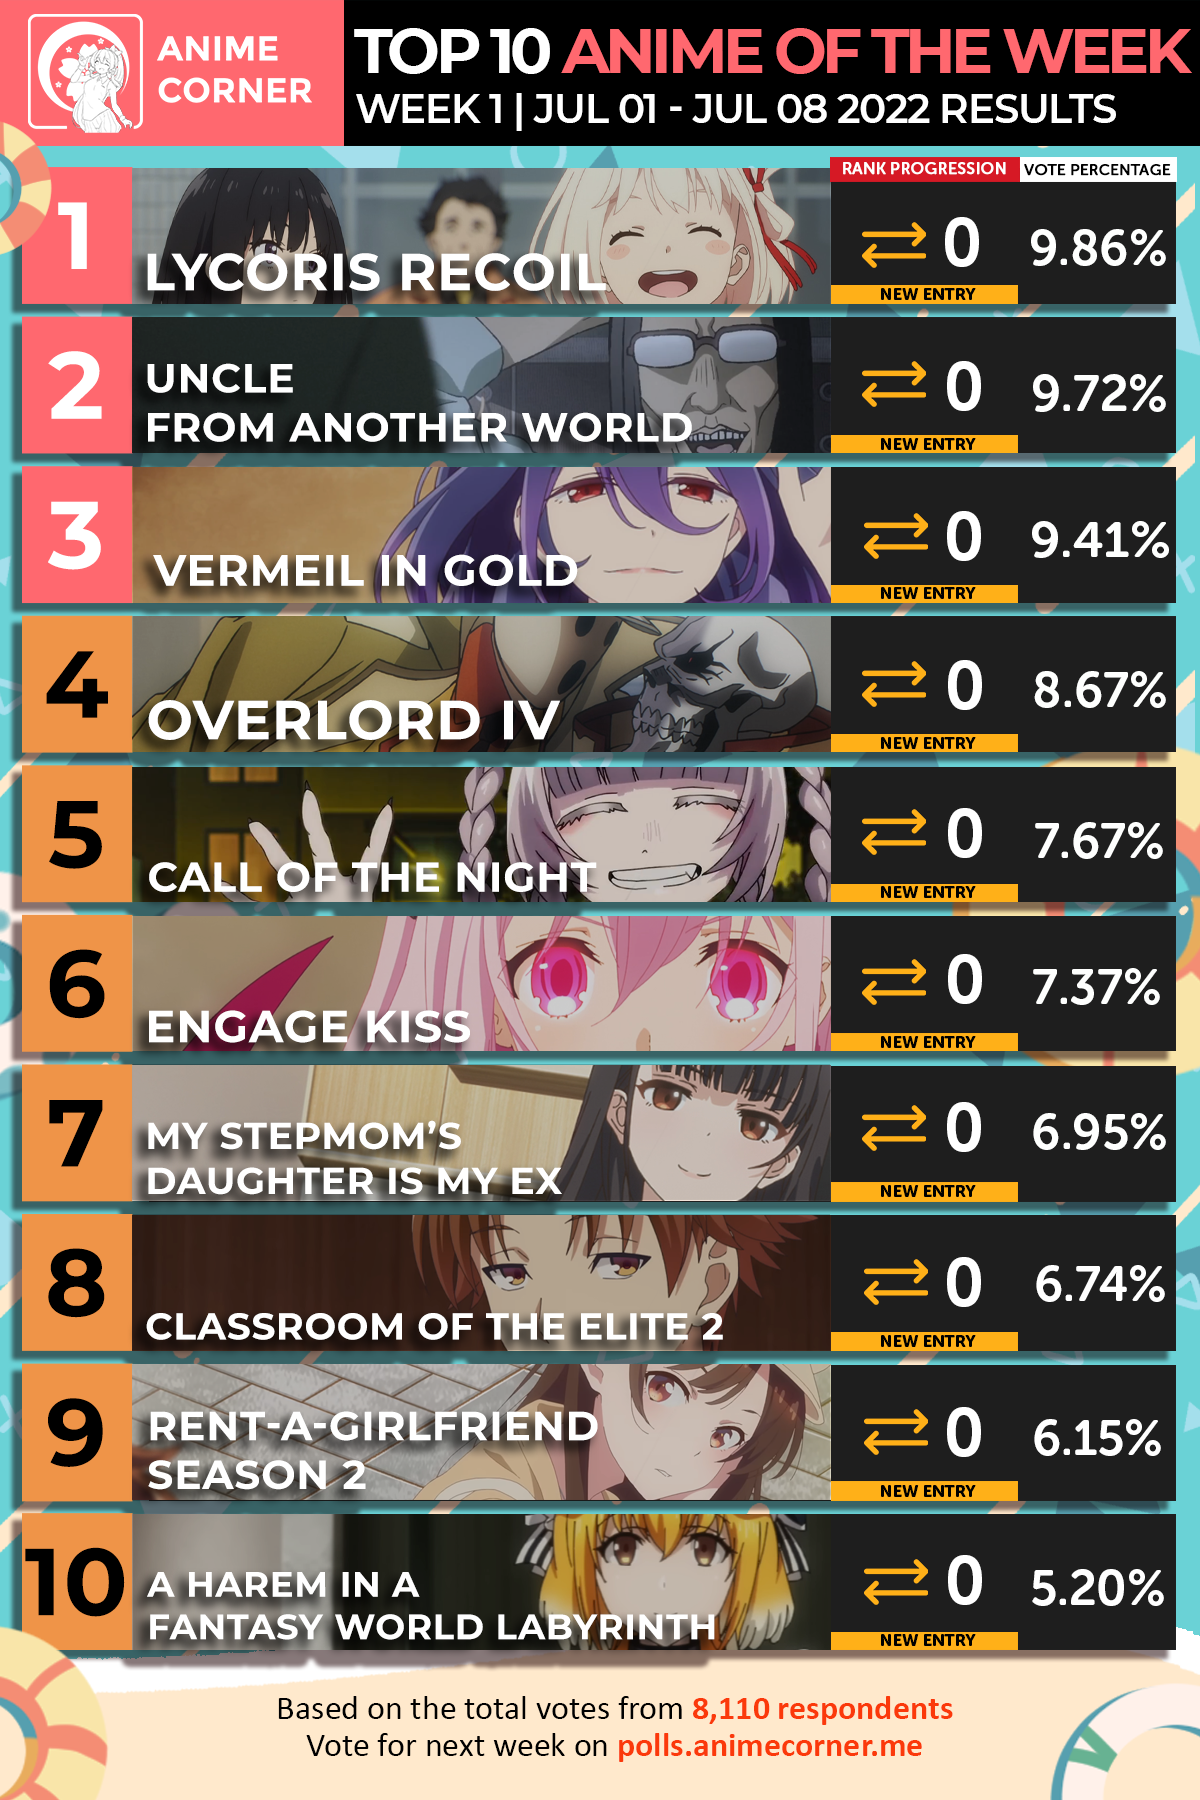 Top 10 Anime of the Week 1 - Summer 2022